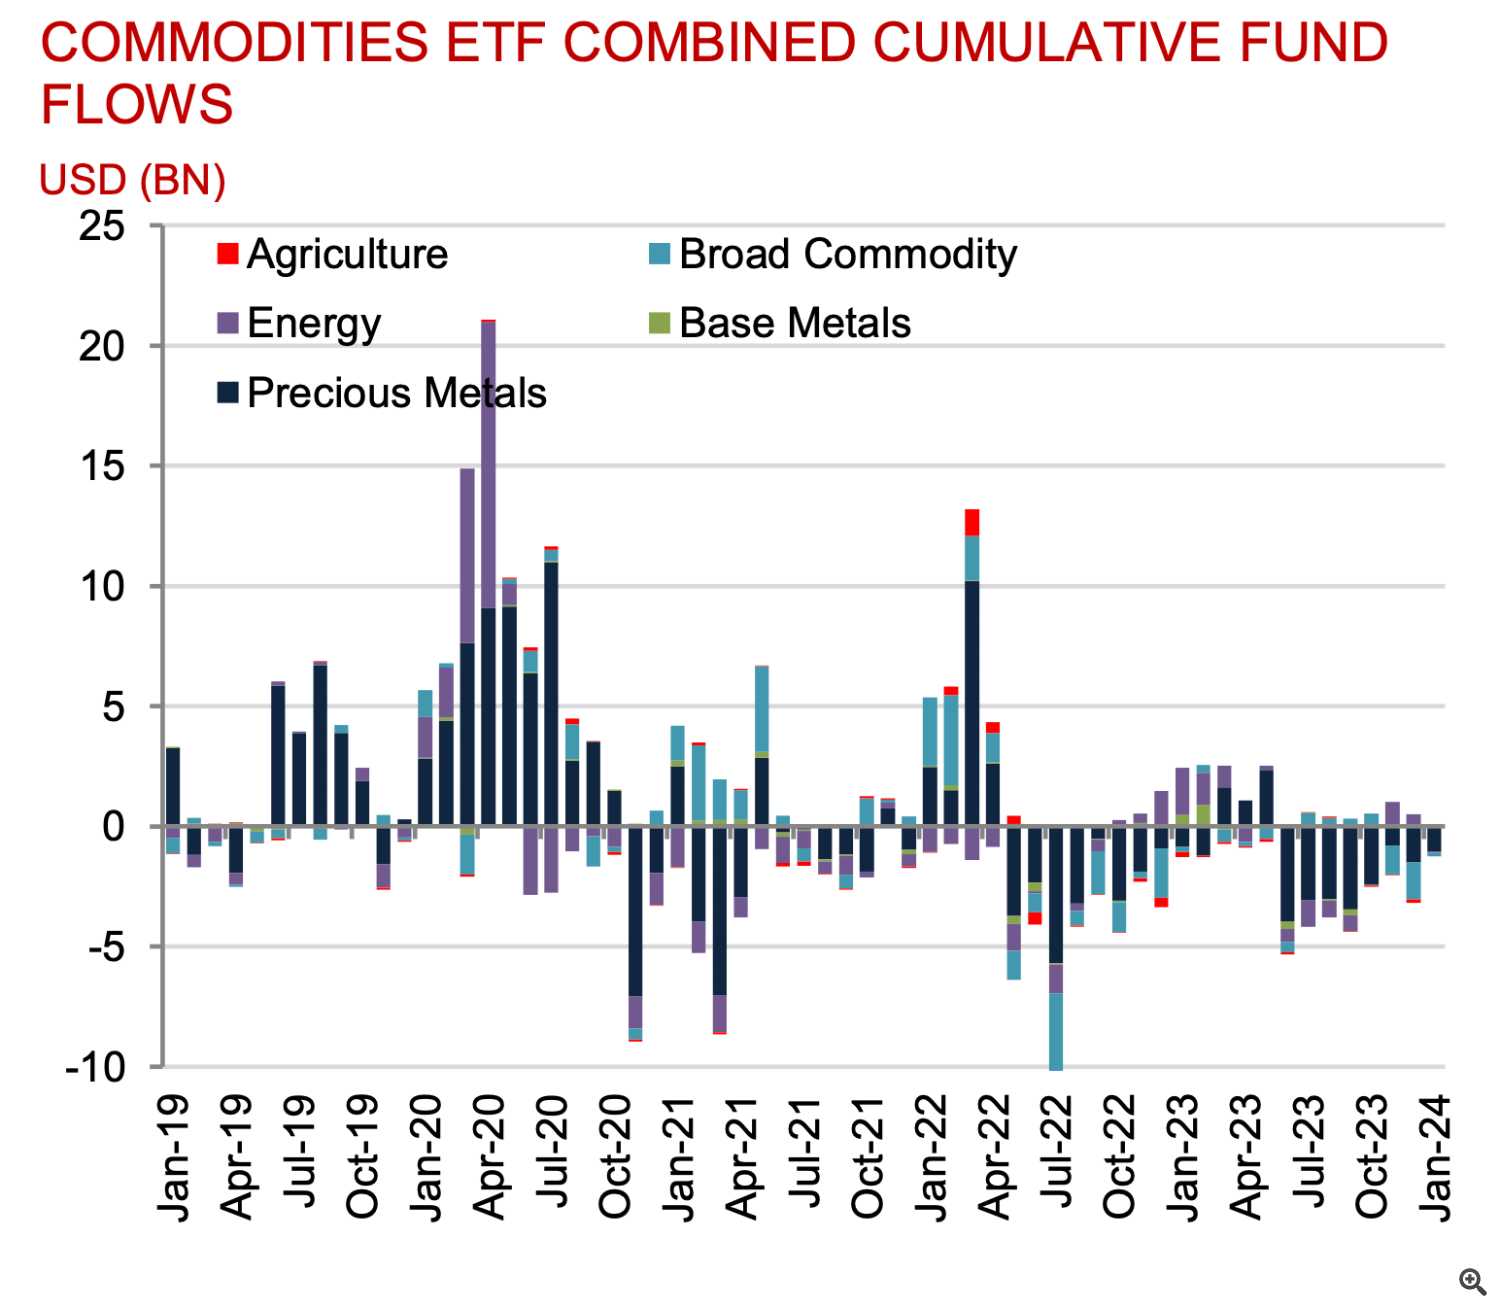 Commodity ETF Fund Flows by Category